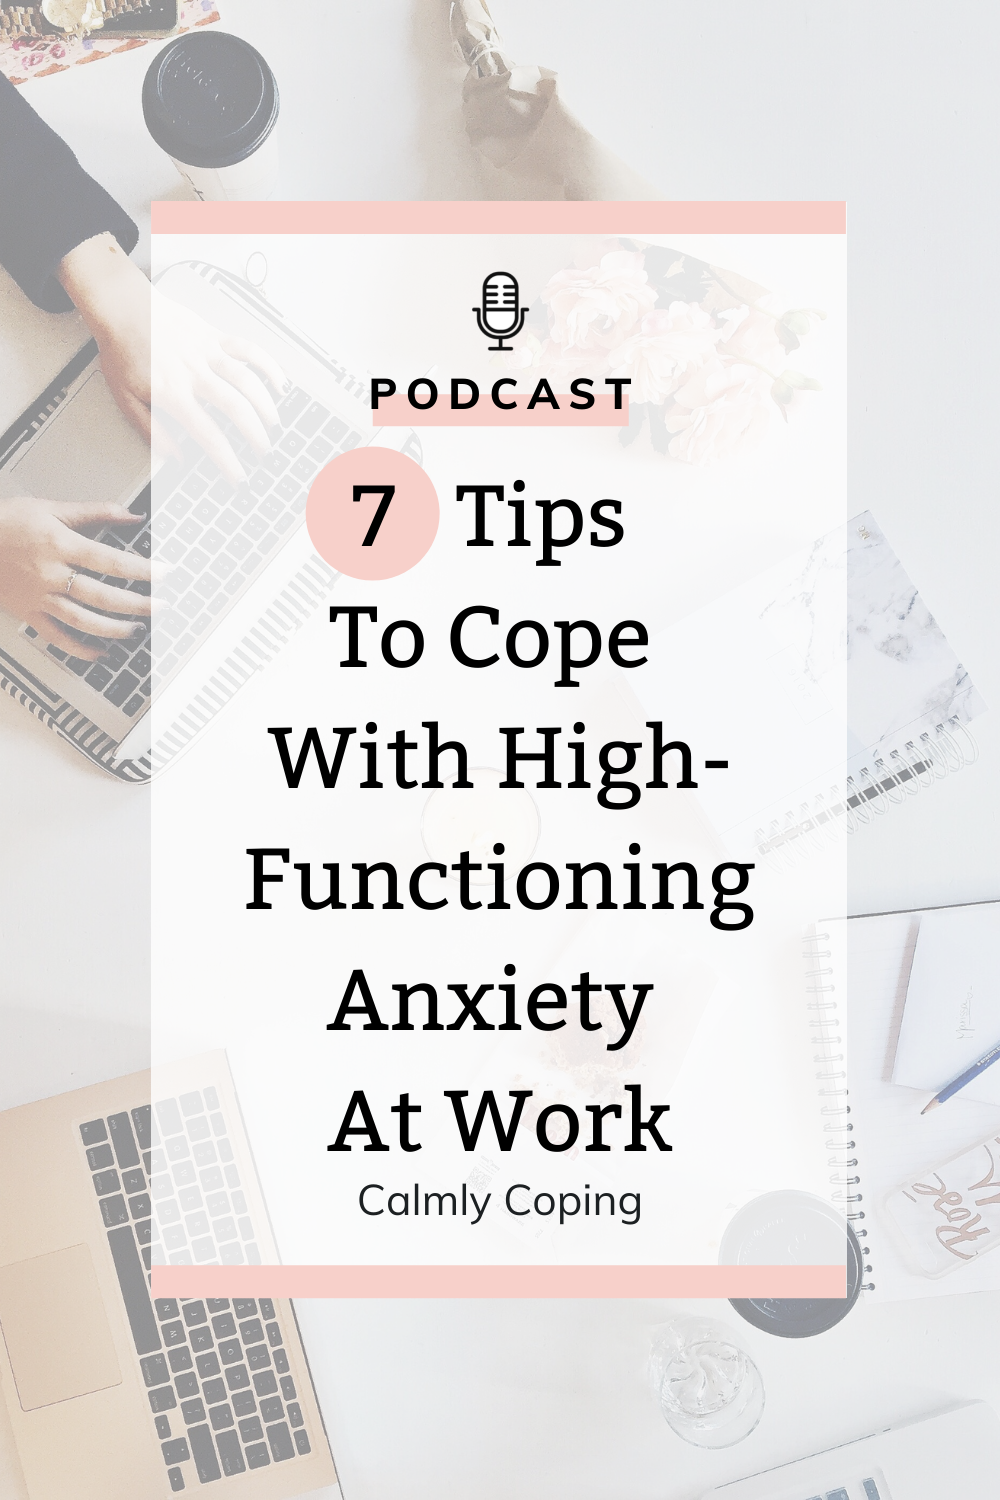 7 Tips To Cope With High-Functioning Anxiety At Work